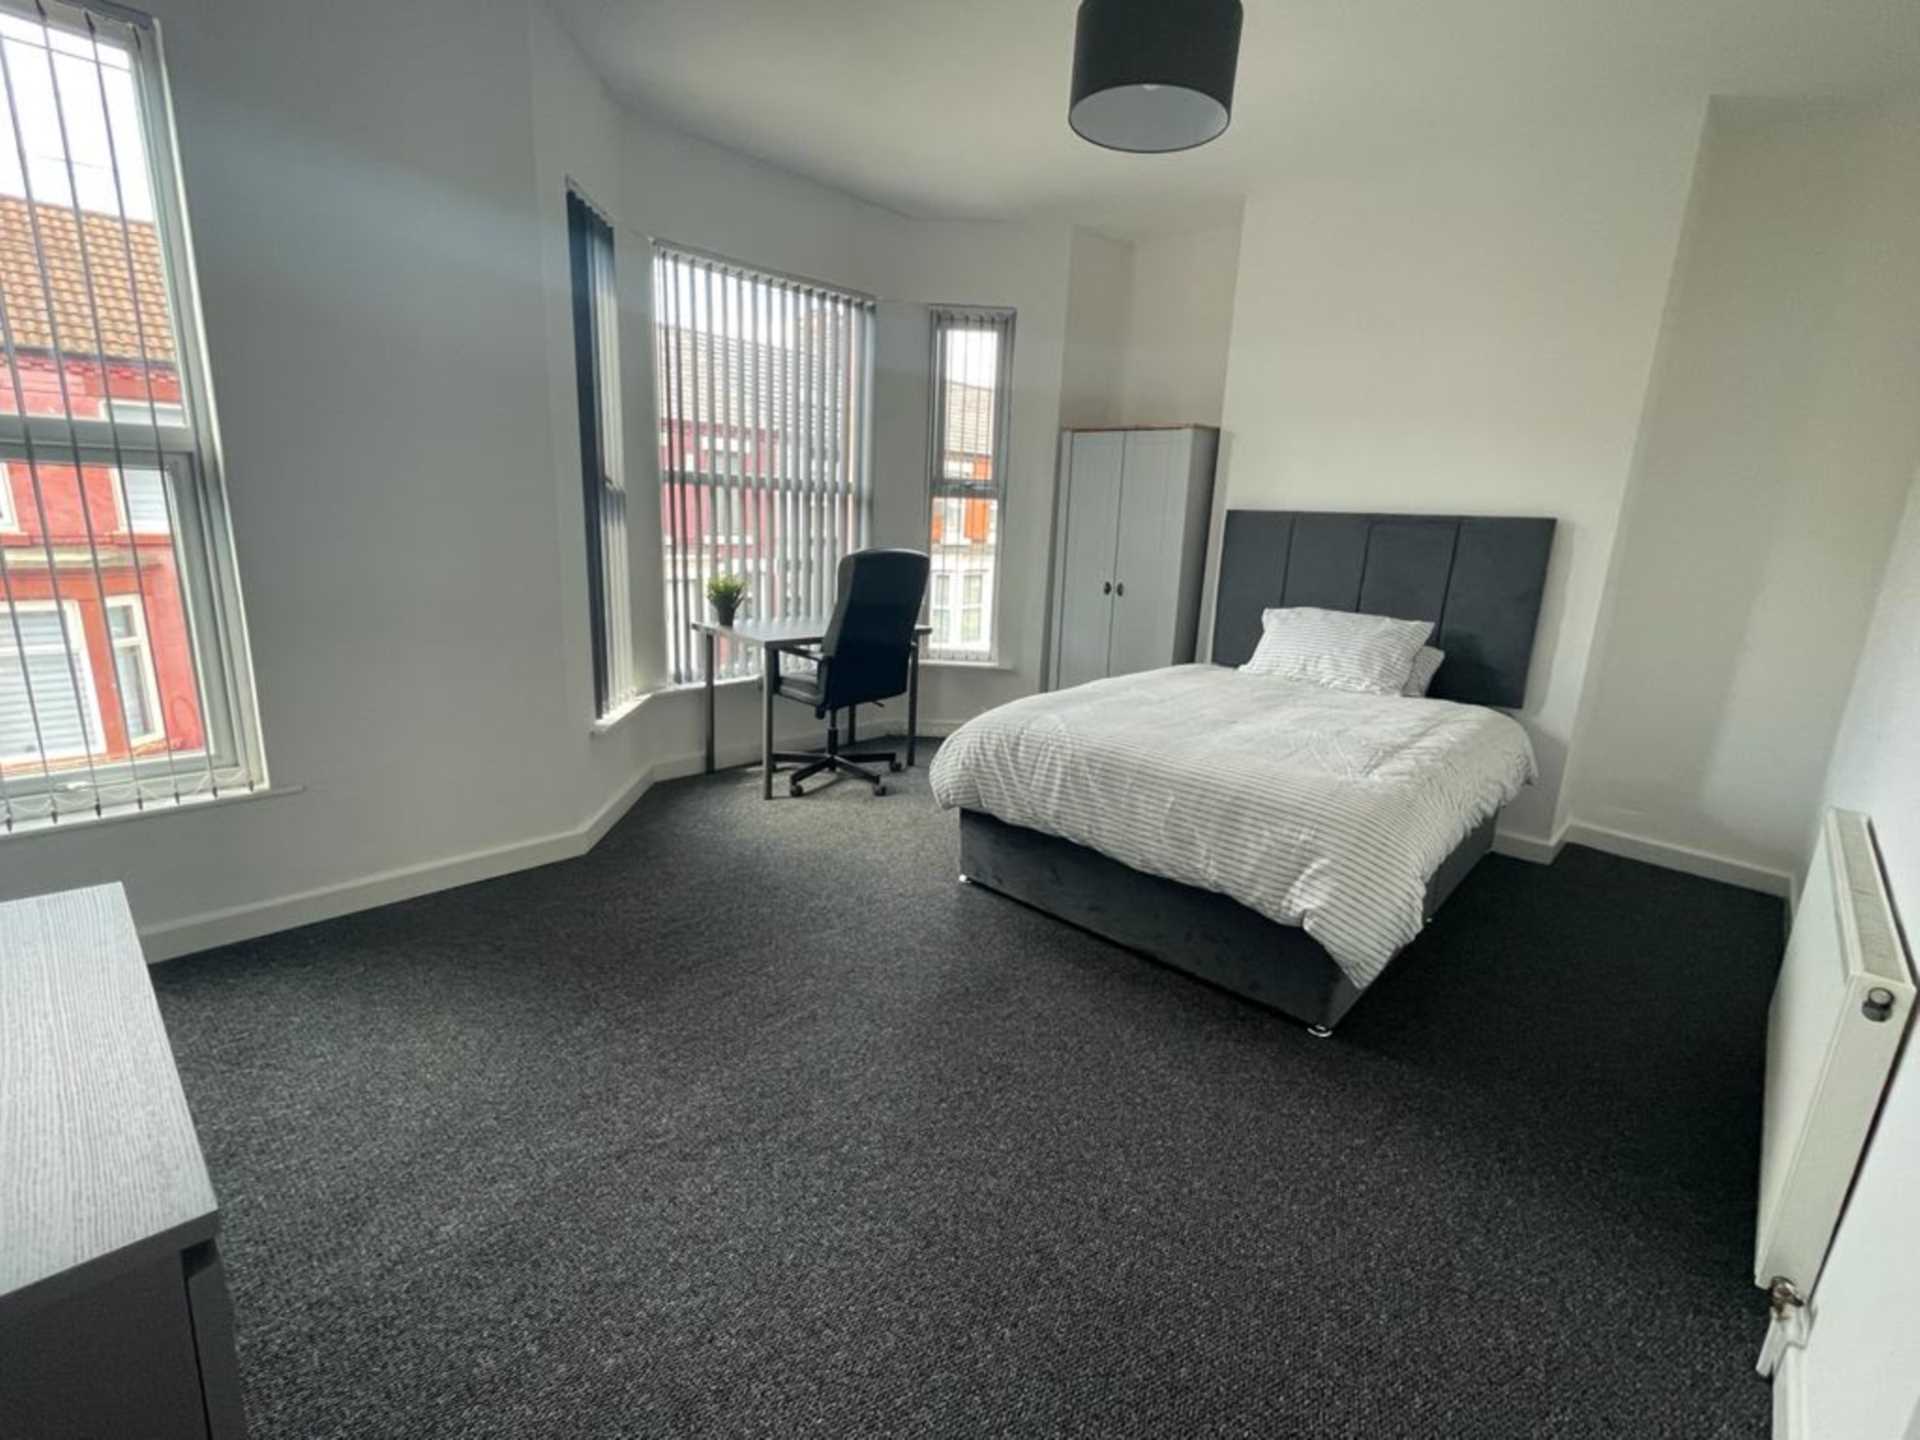 Thornycroft Road, Wavertree - STUDENTS/PROFESSIONALS - 2 Rooms Available, Image 1